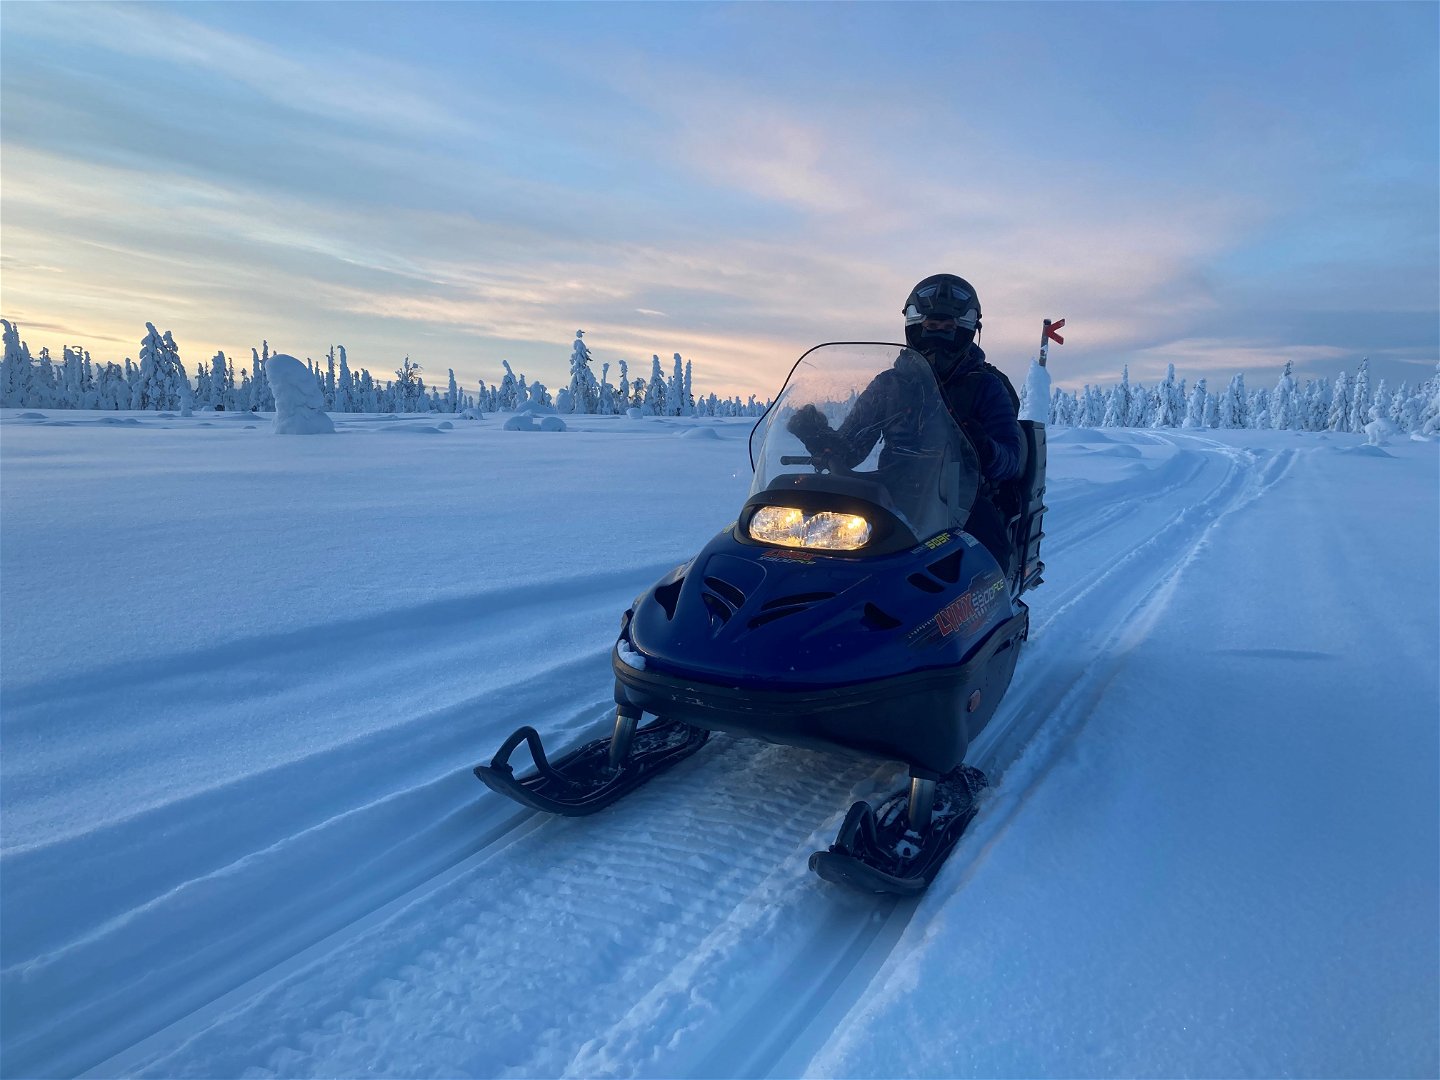 There are many nice tracks for driving snowmobile in Överkalix